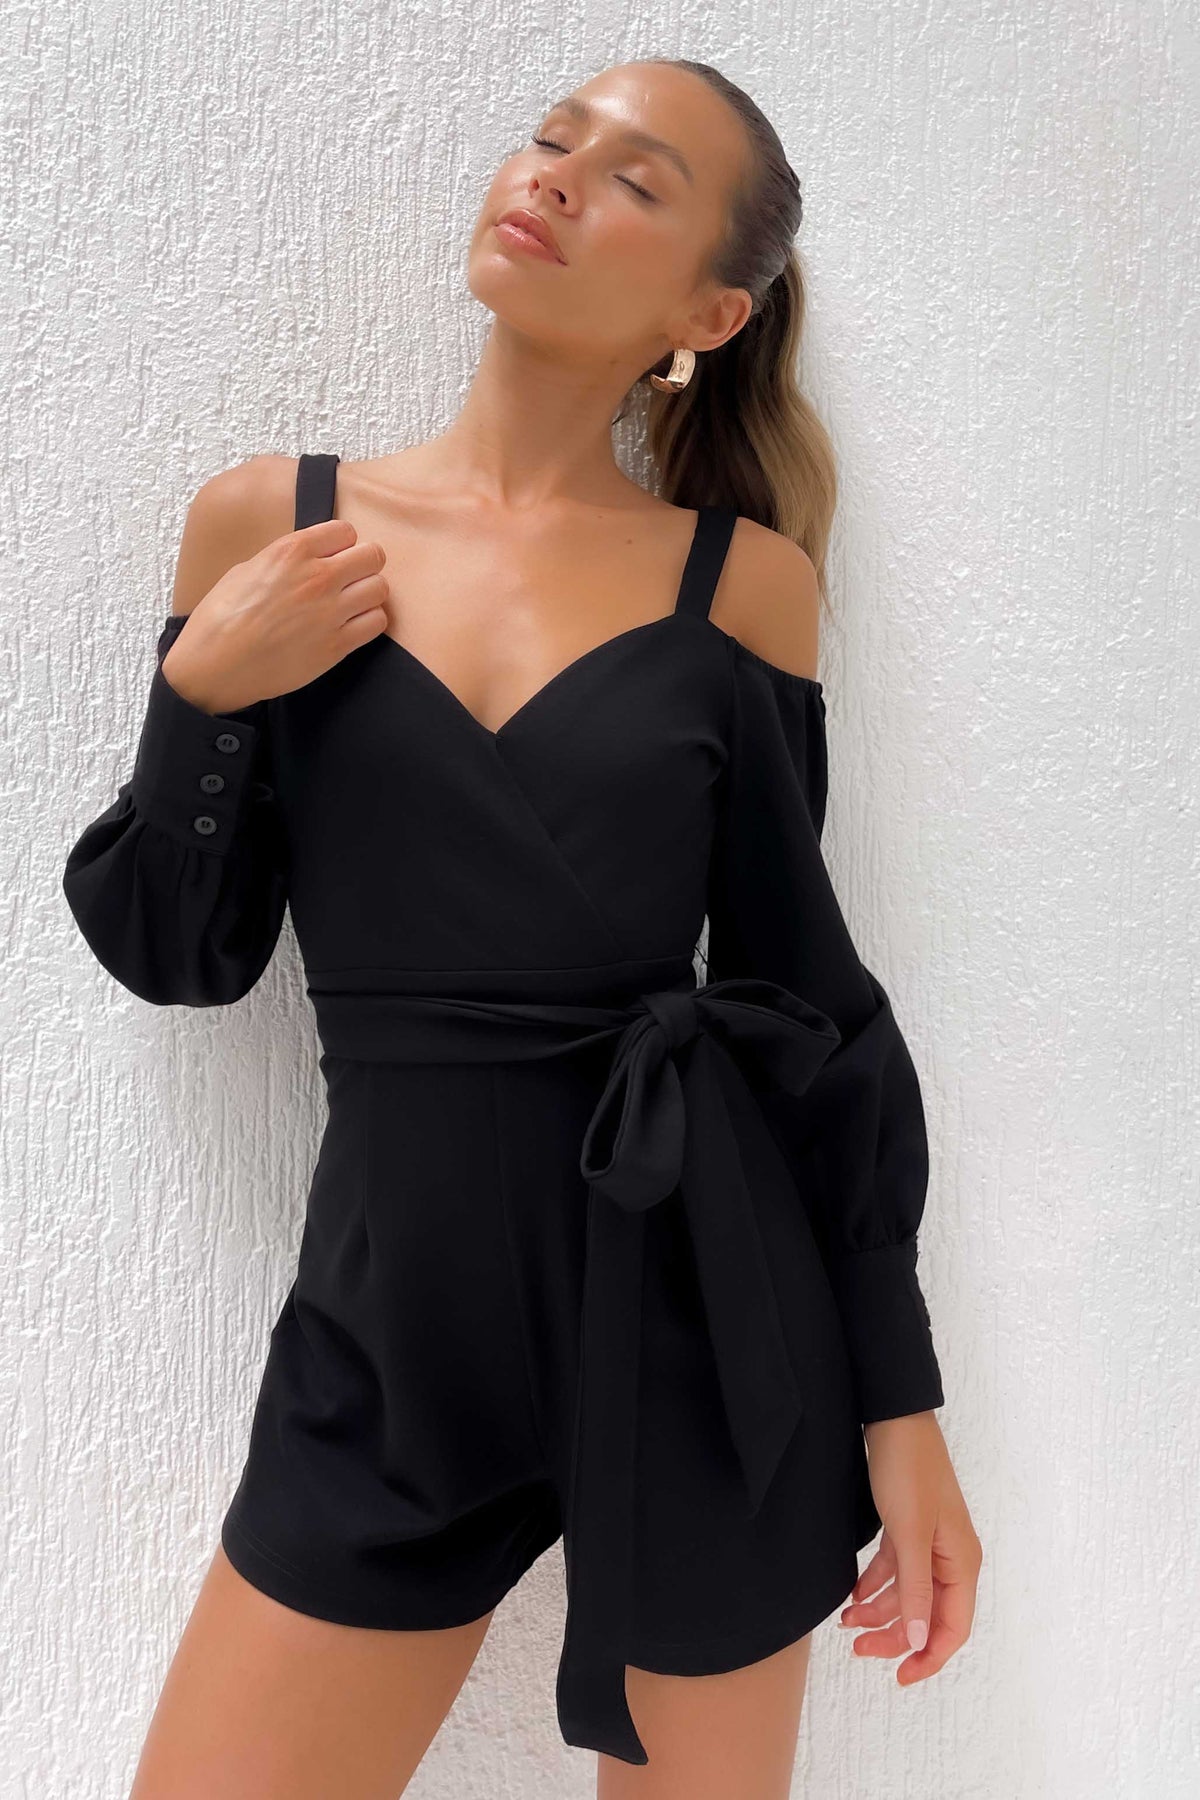 Changing Playsuit, BLACK, LONG SLEEVE, new arrivals, PLAYSUIT, PLAYSUITS, SPANDEX &amp; NYLON &amp; RAYON, SPANDEX AND NYLON AND RAYON, , -MISHKAH